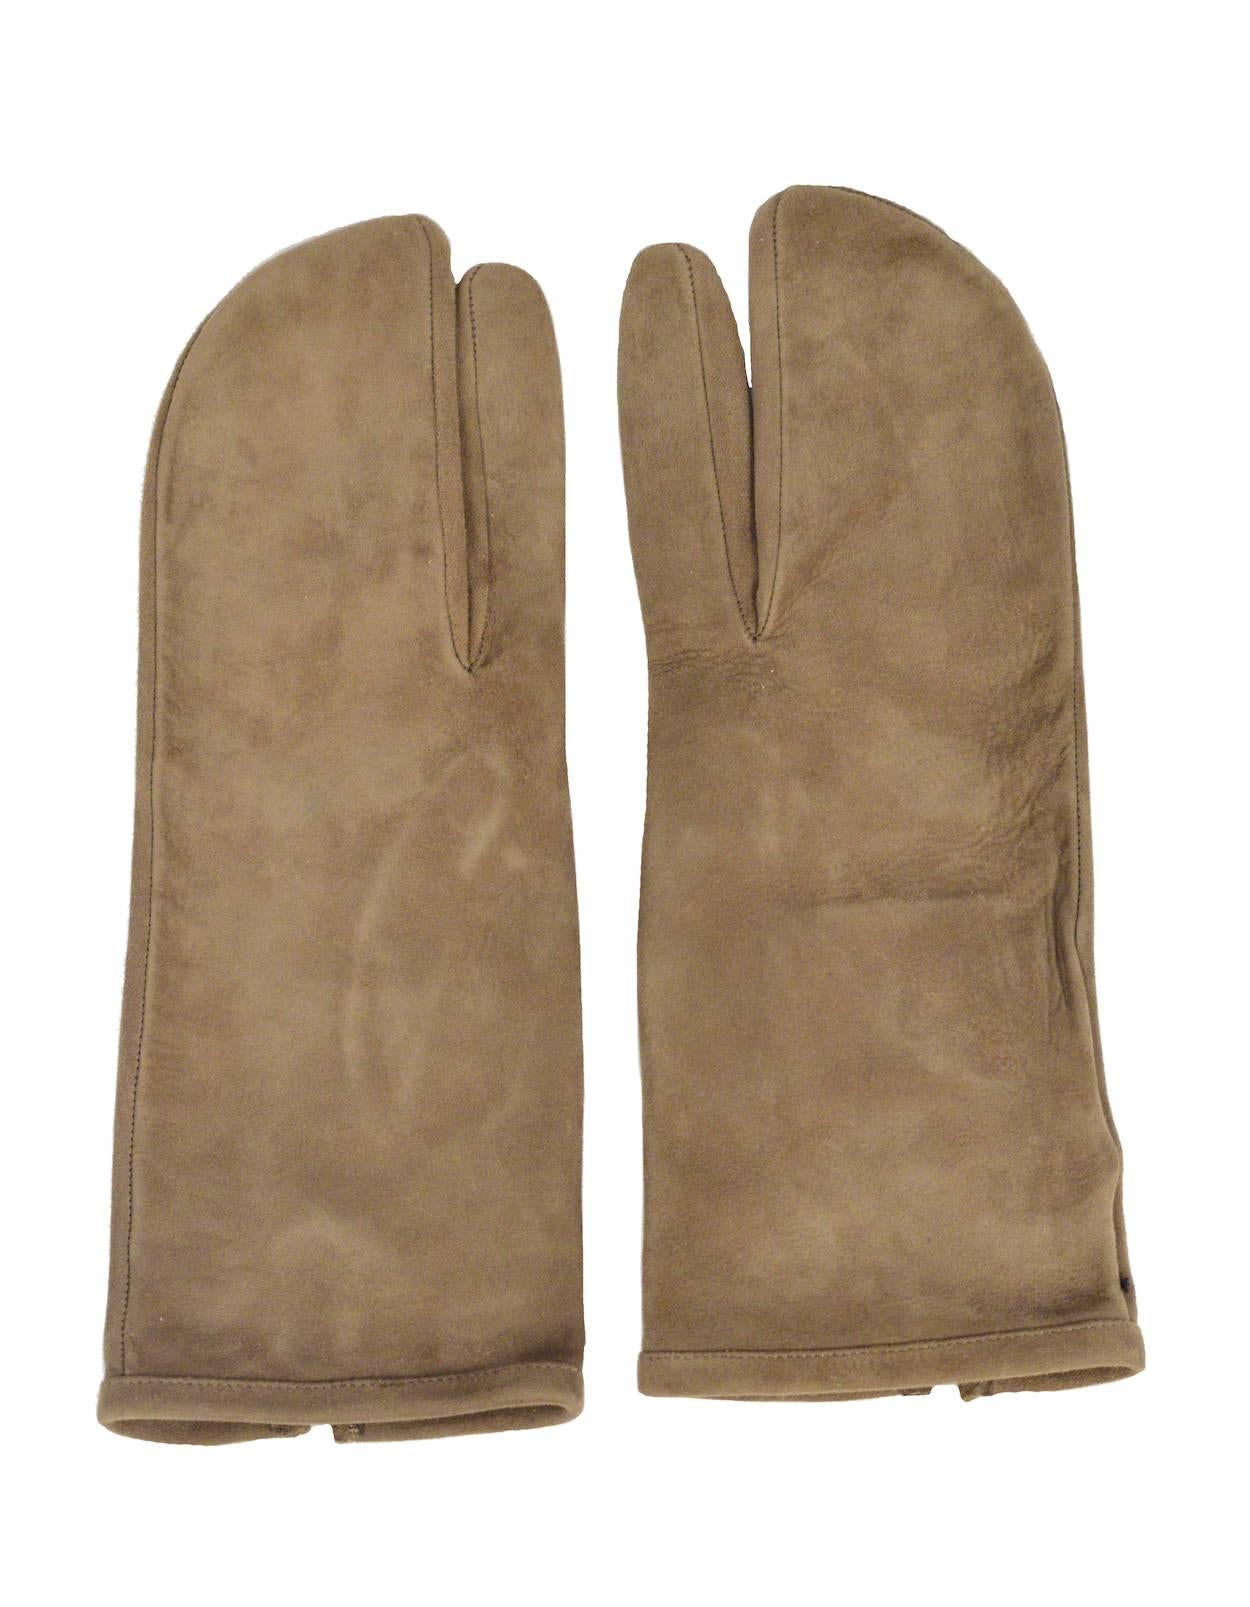 Vintage Maison Martin Margiela tan suede gloves featuring tabi detailing at the fingers.
Please inquire for additional images.